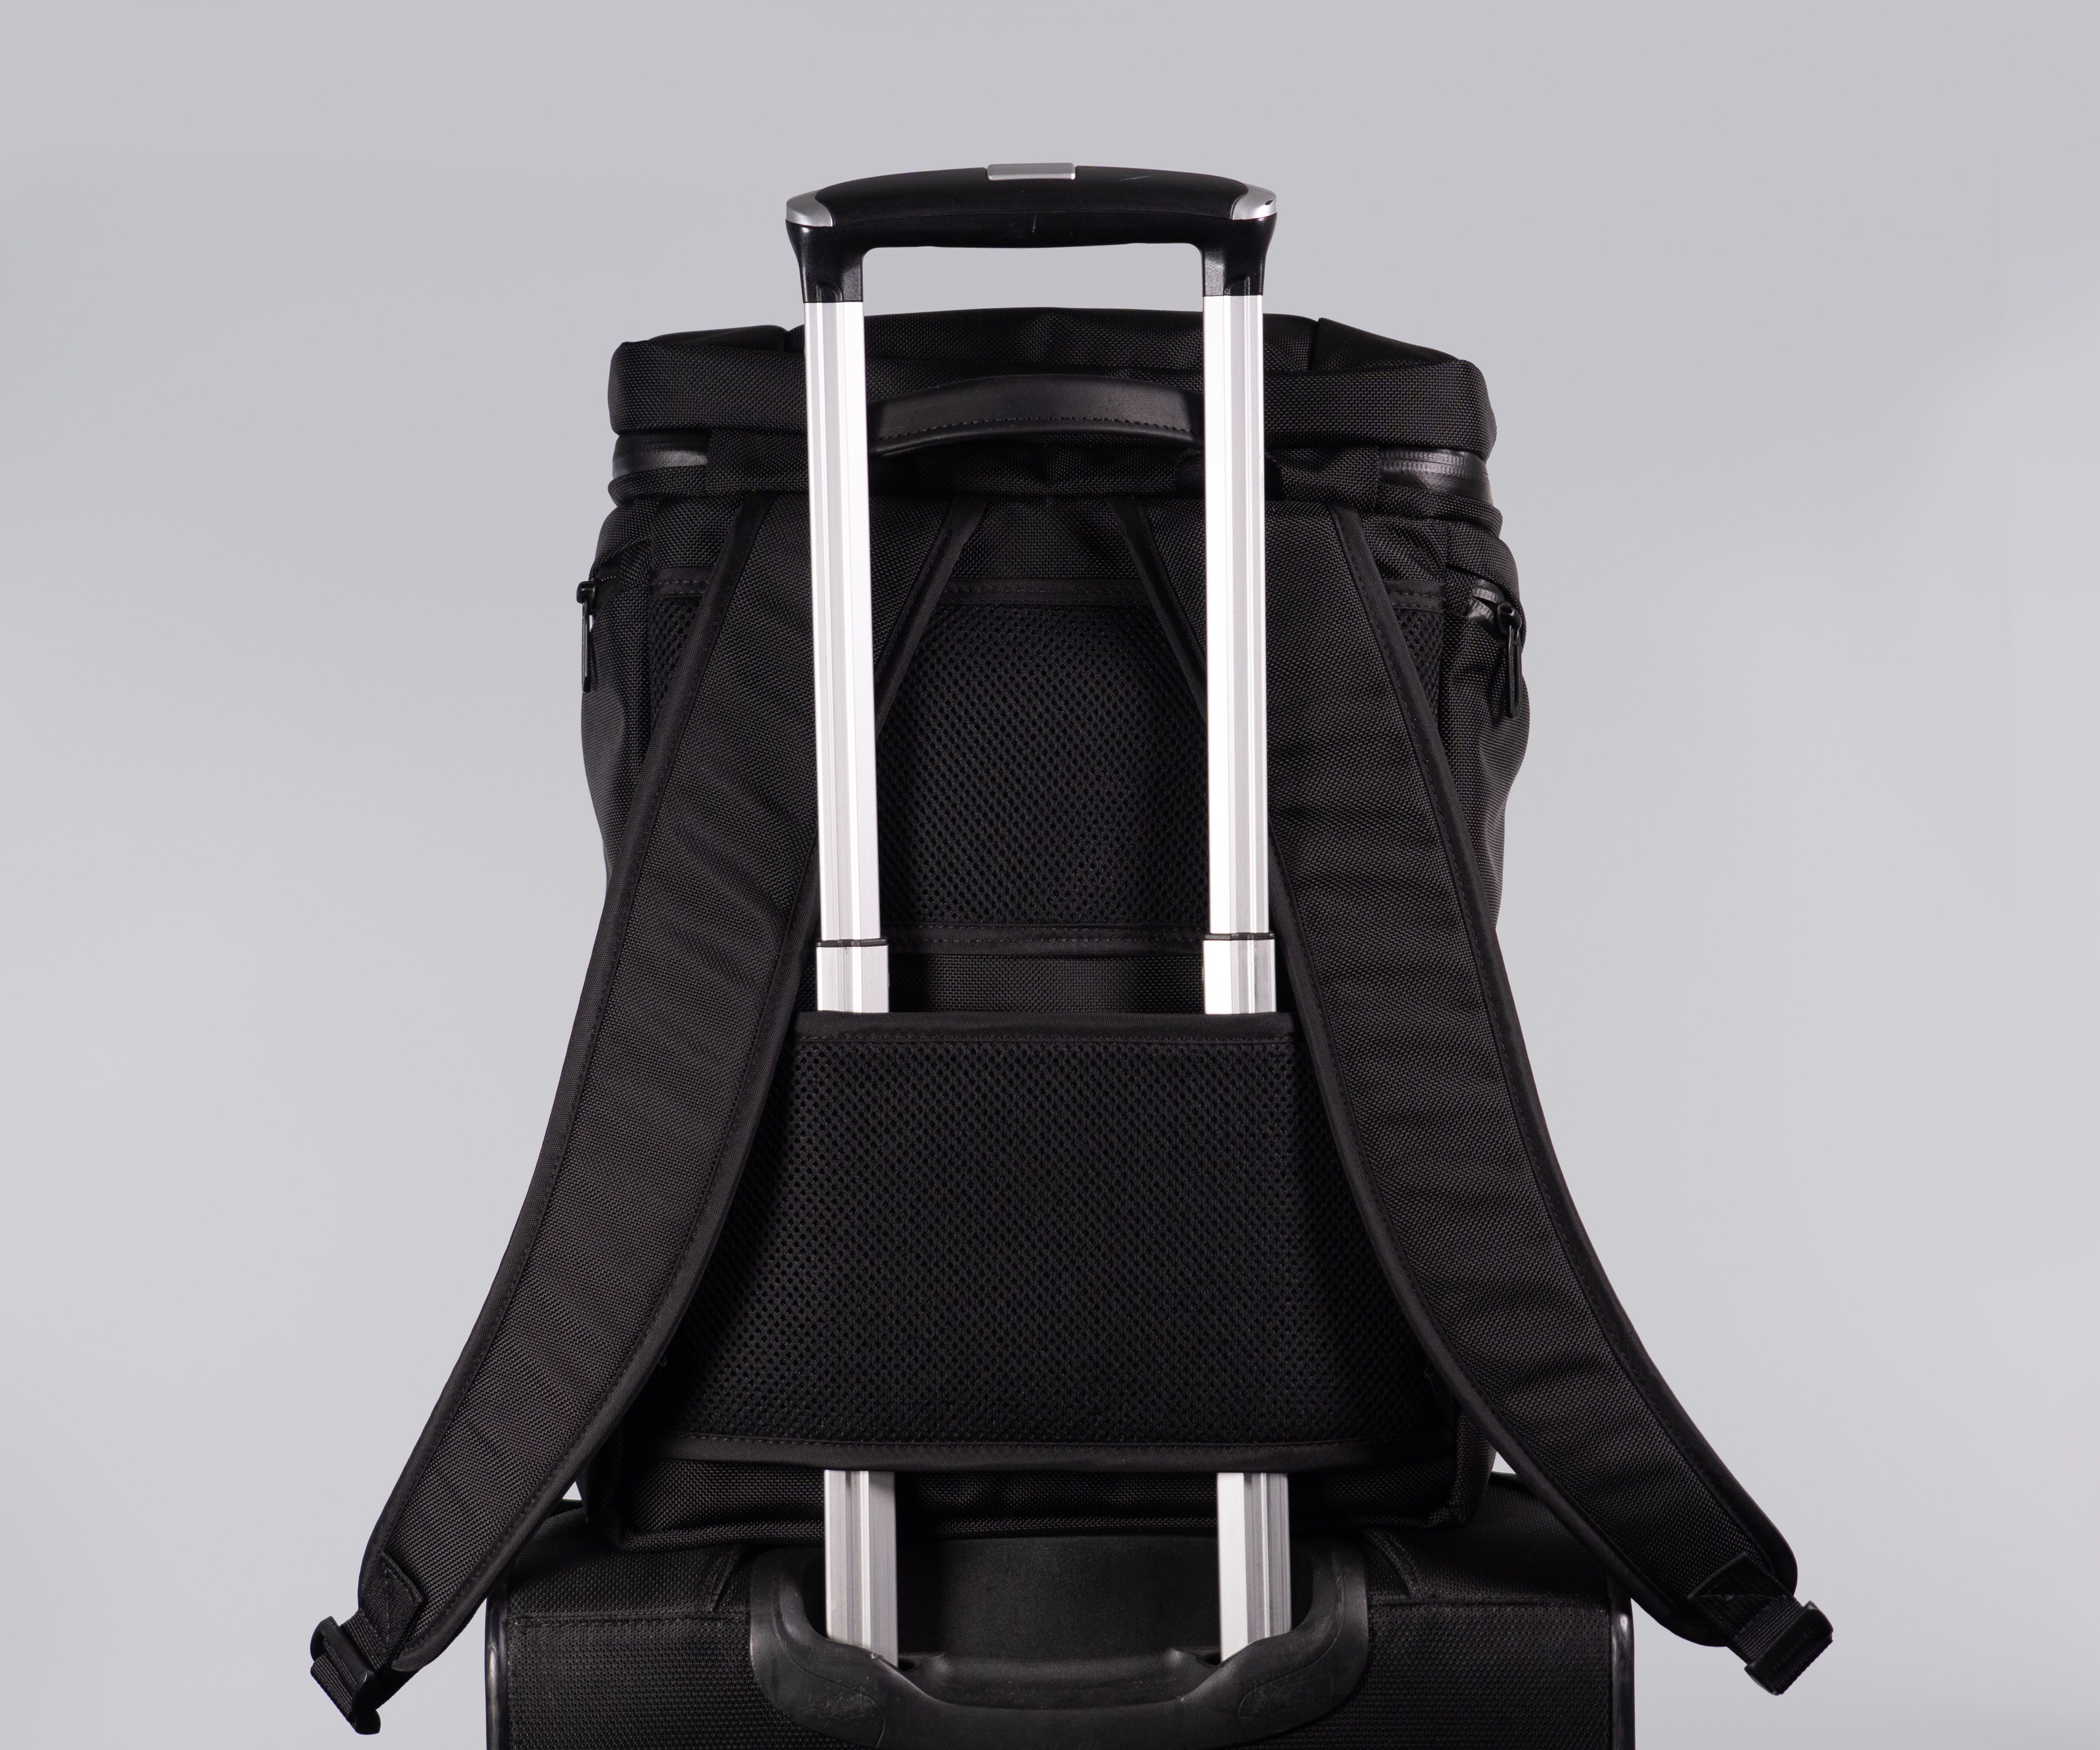 Lower mesh padding doubles as a wheeled suitcase pass-through